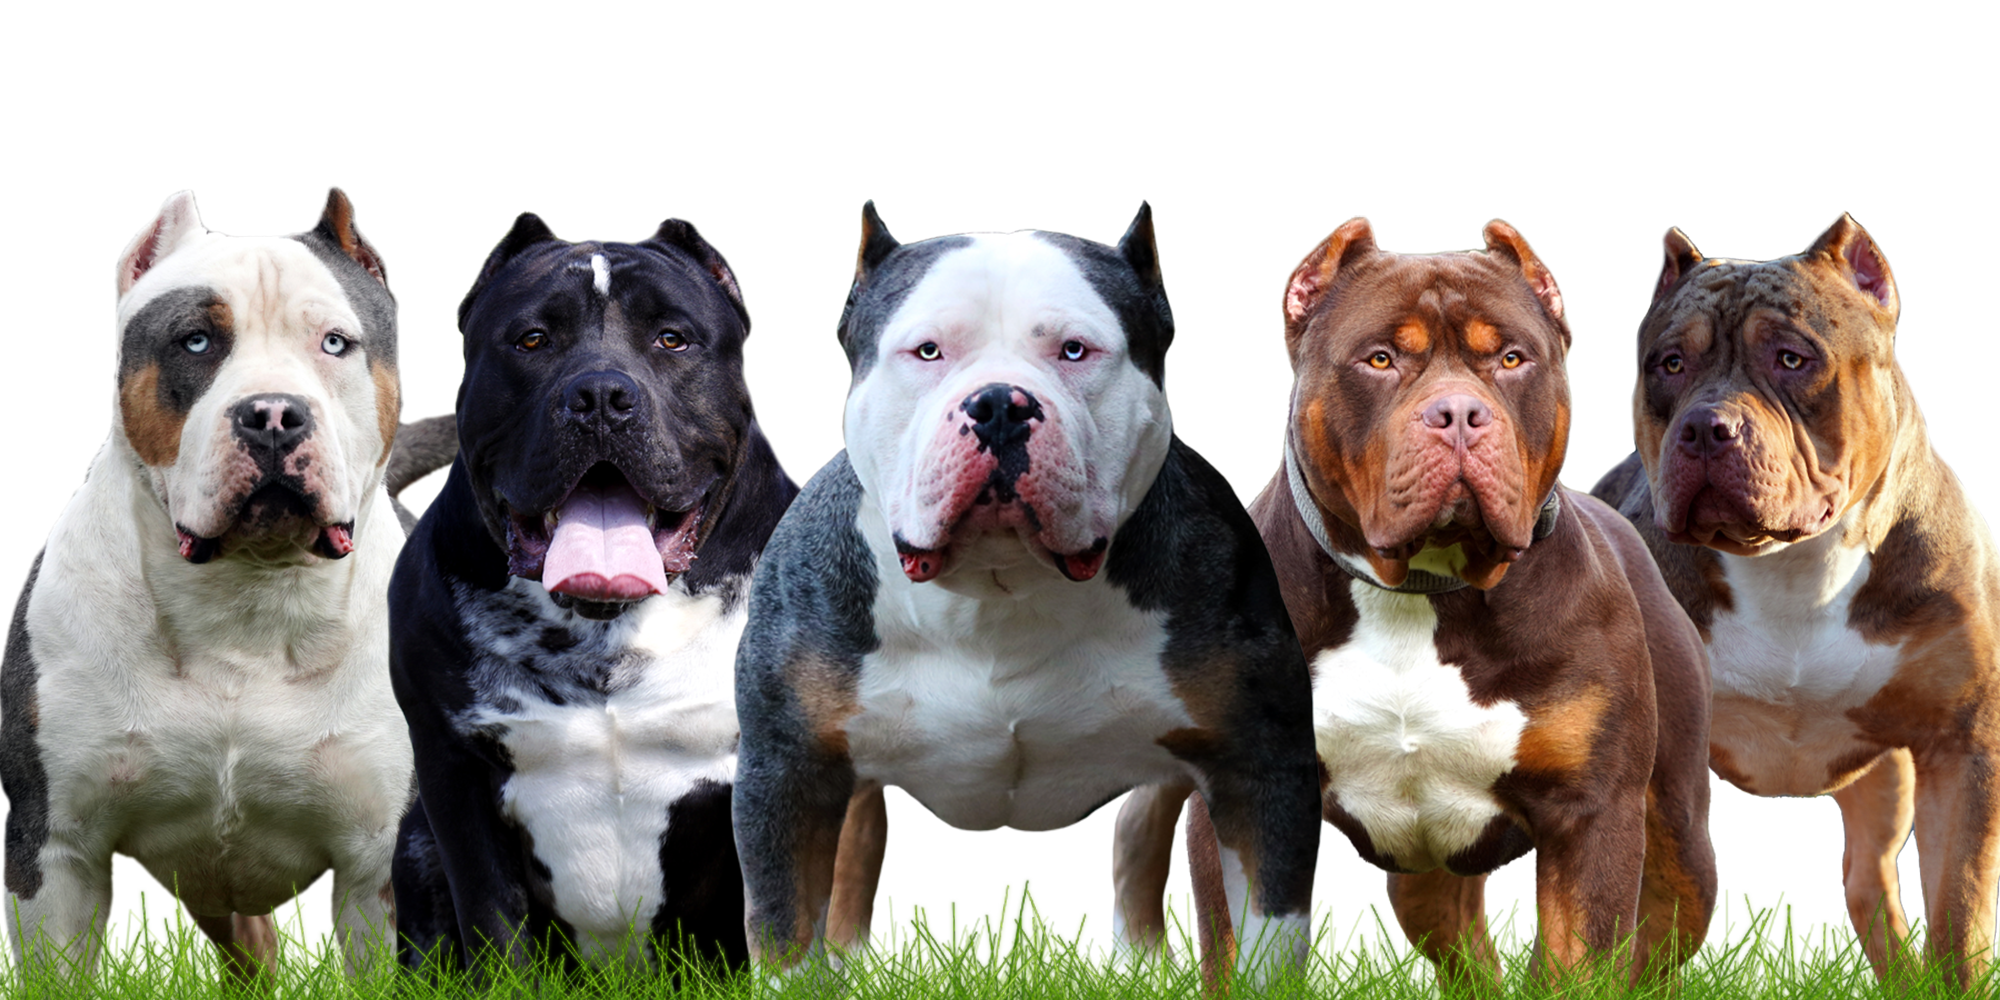 Where To Buy American Bully?